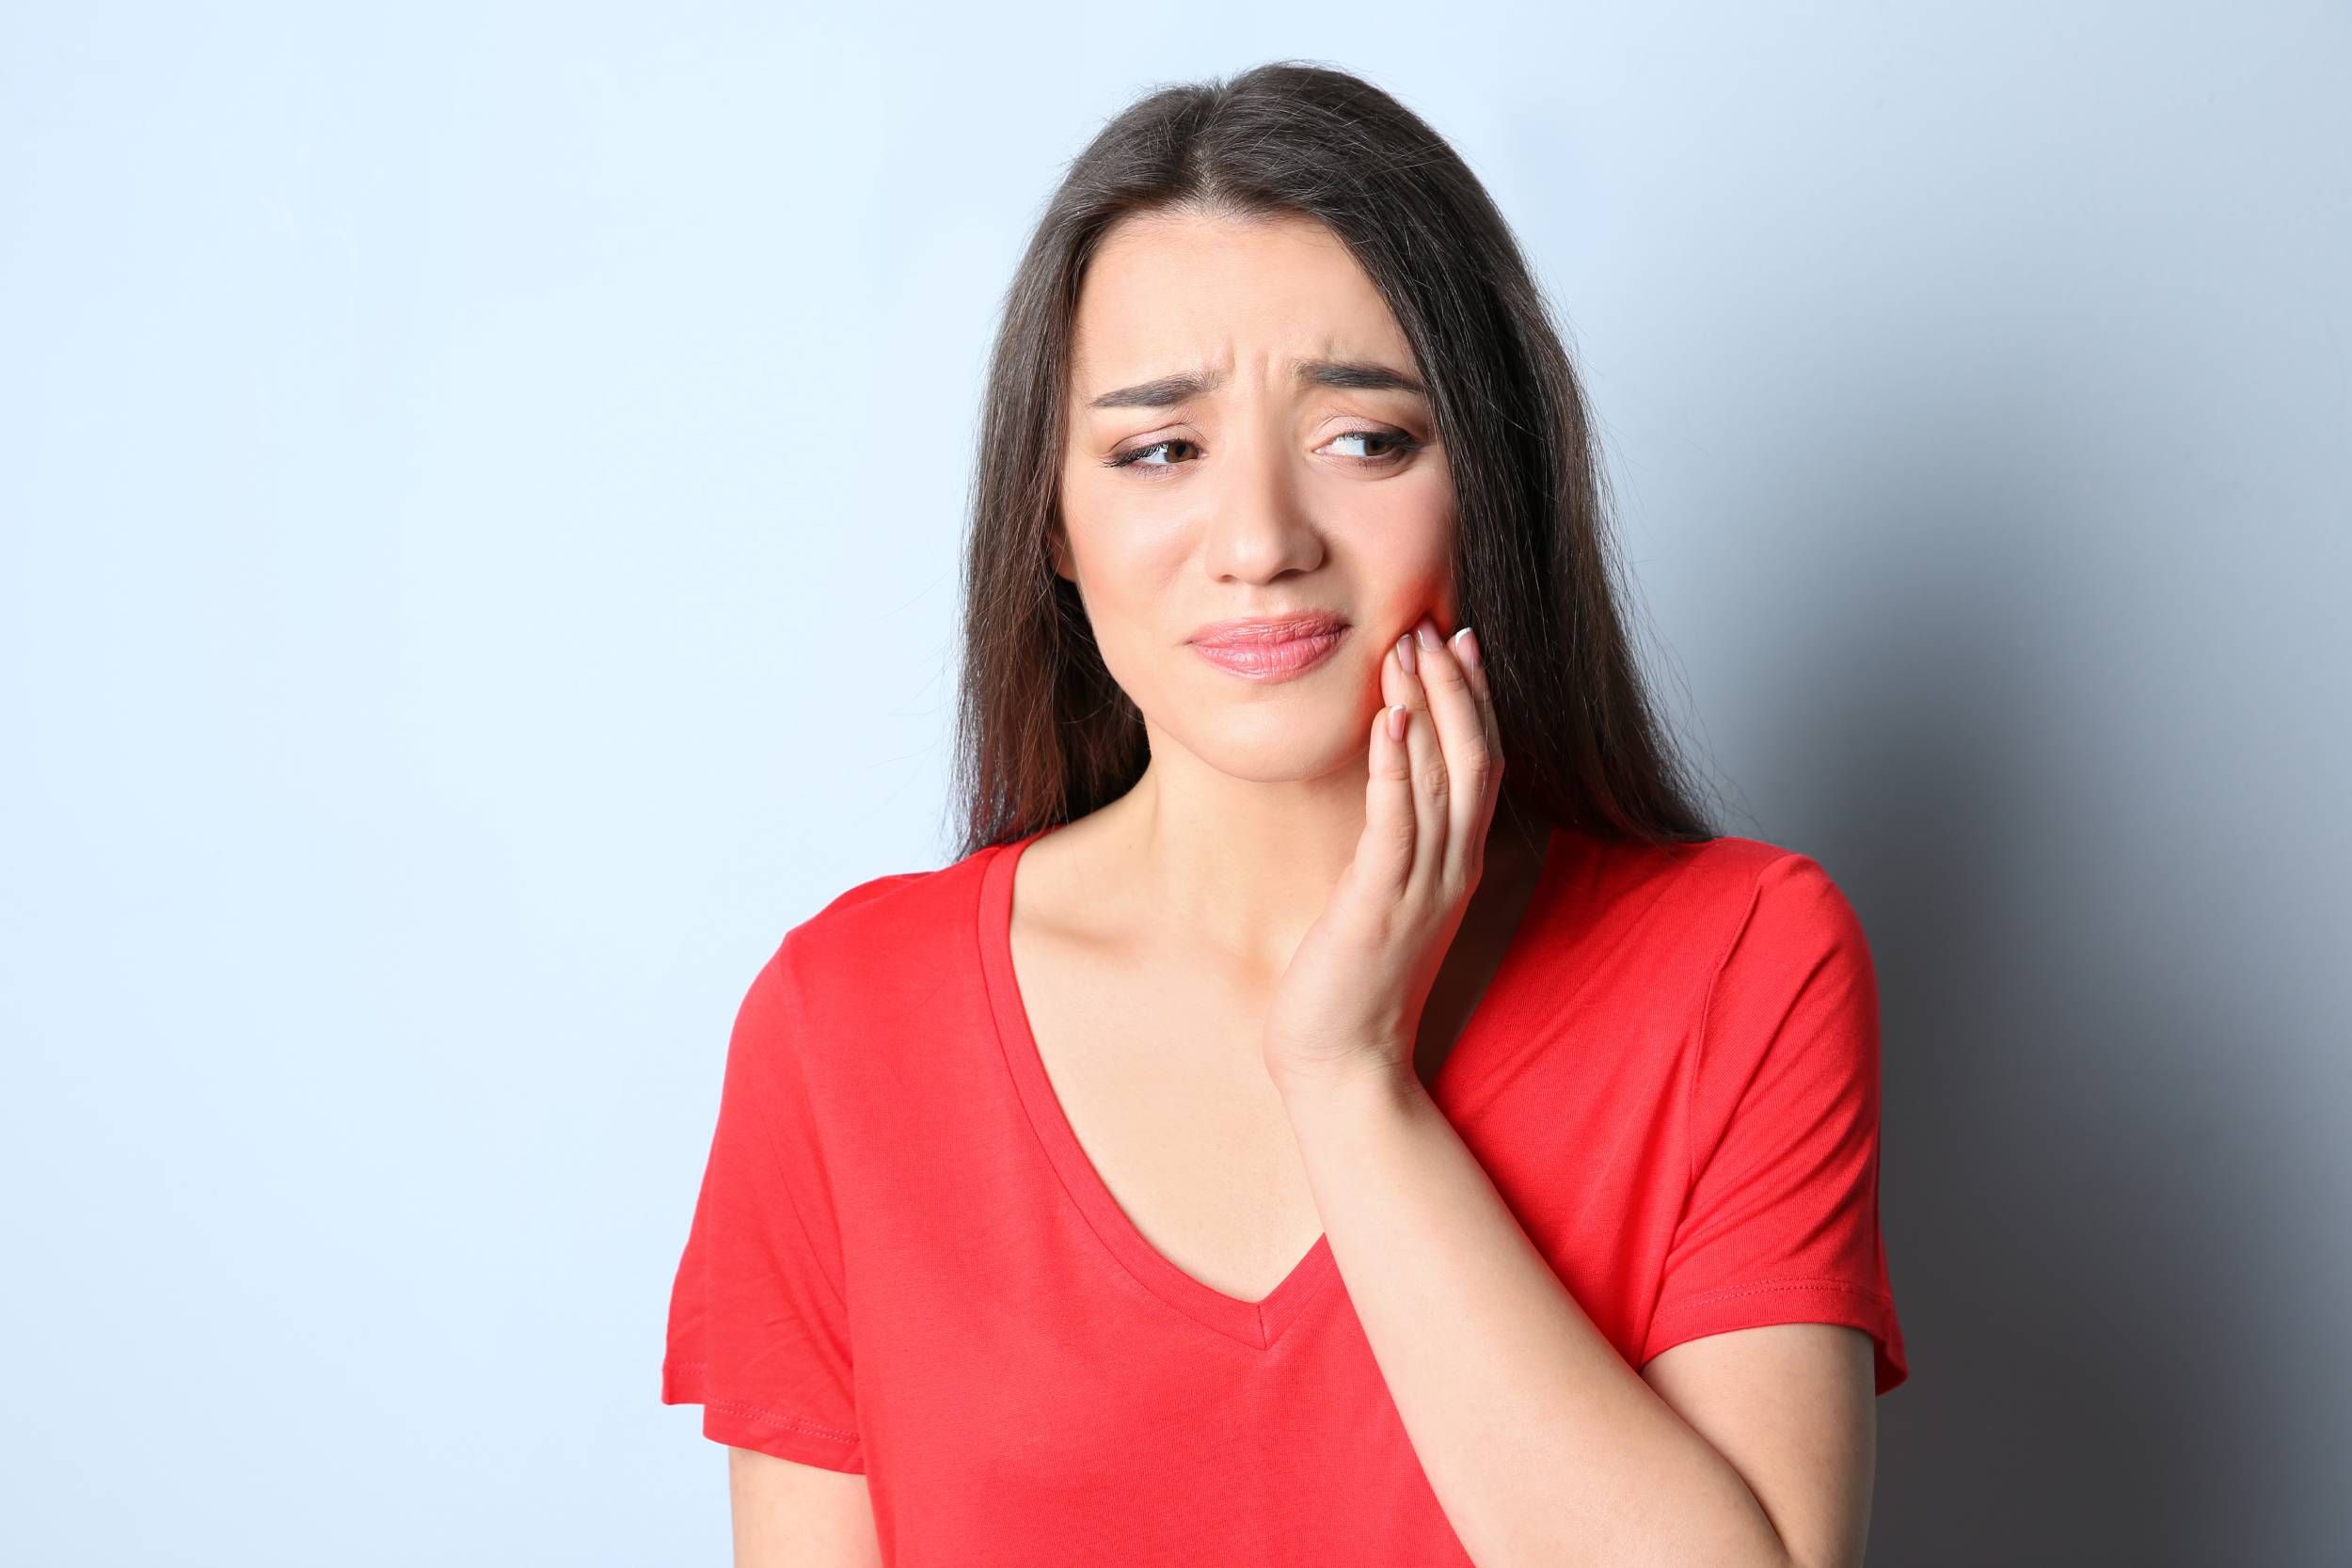 Signs and Symptoms That Your Dental Implant Needs to Be Replaced